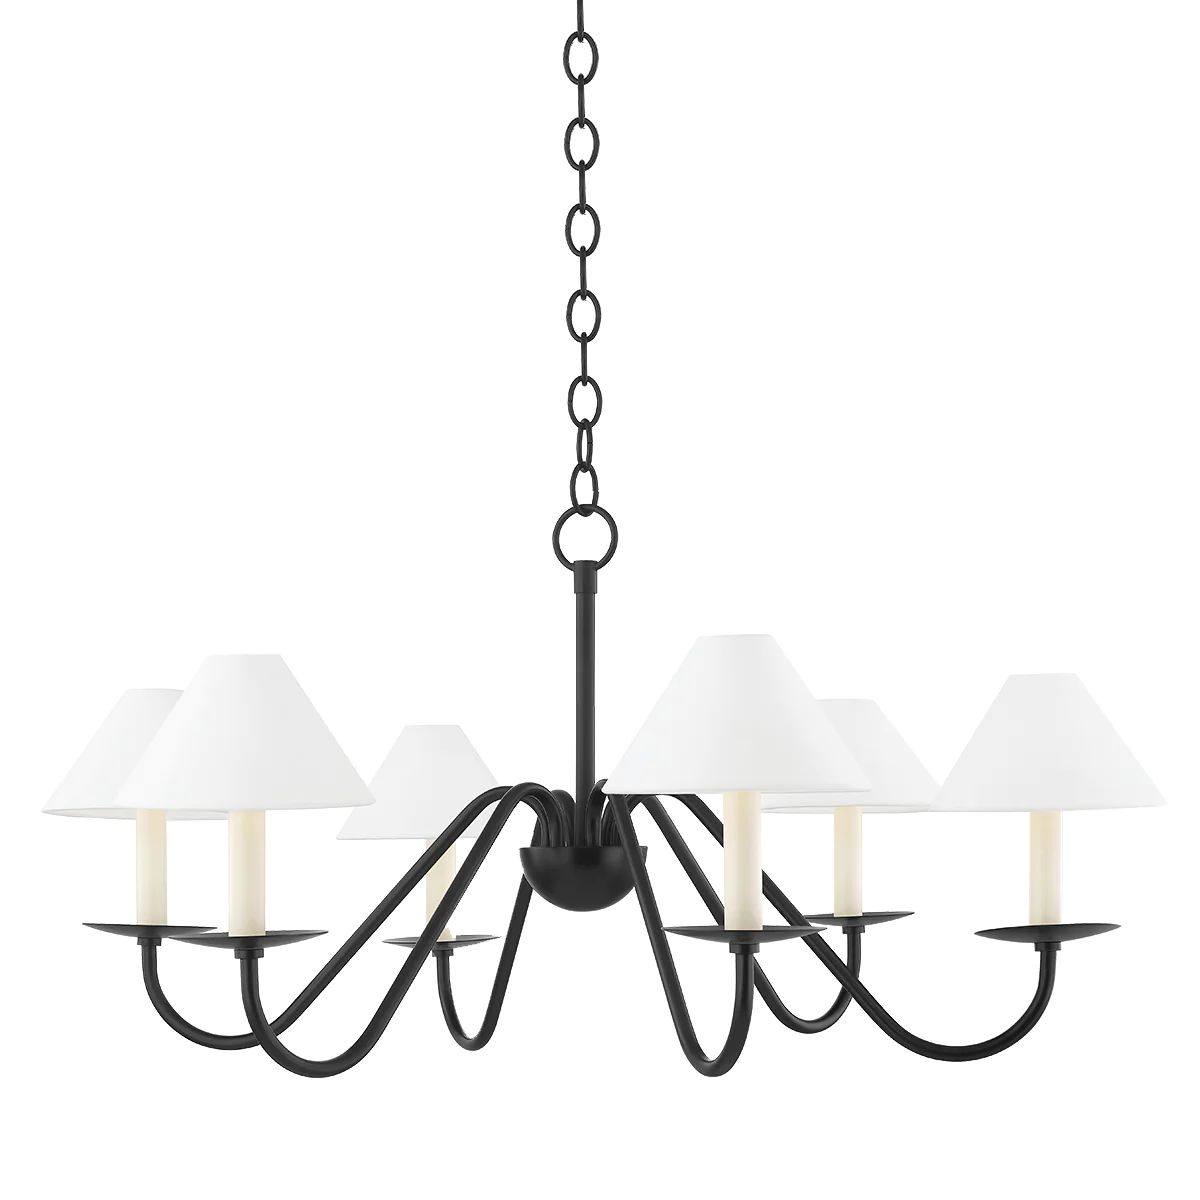 Lenore Chandelier | Tuesday Made